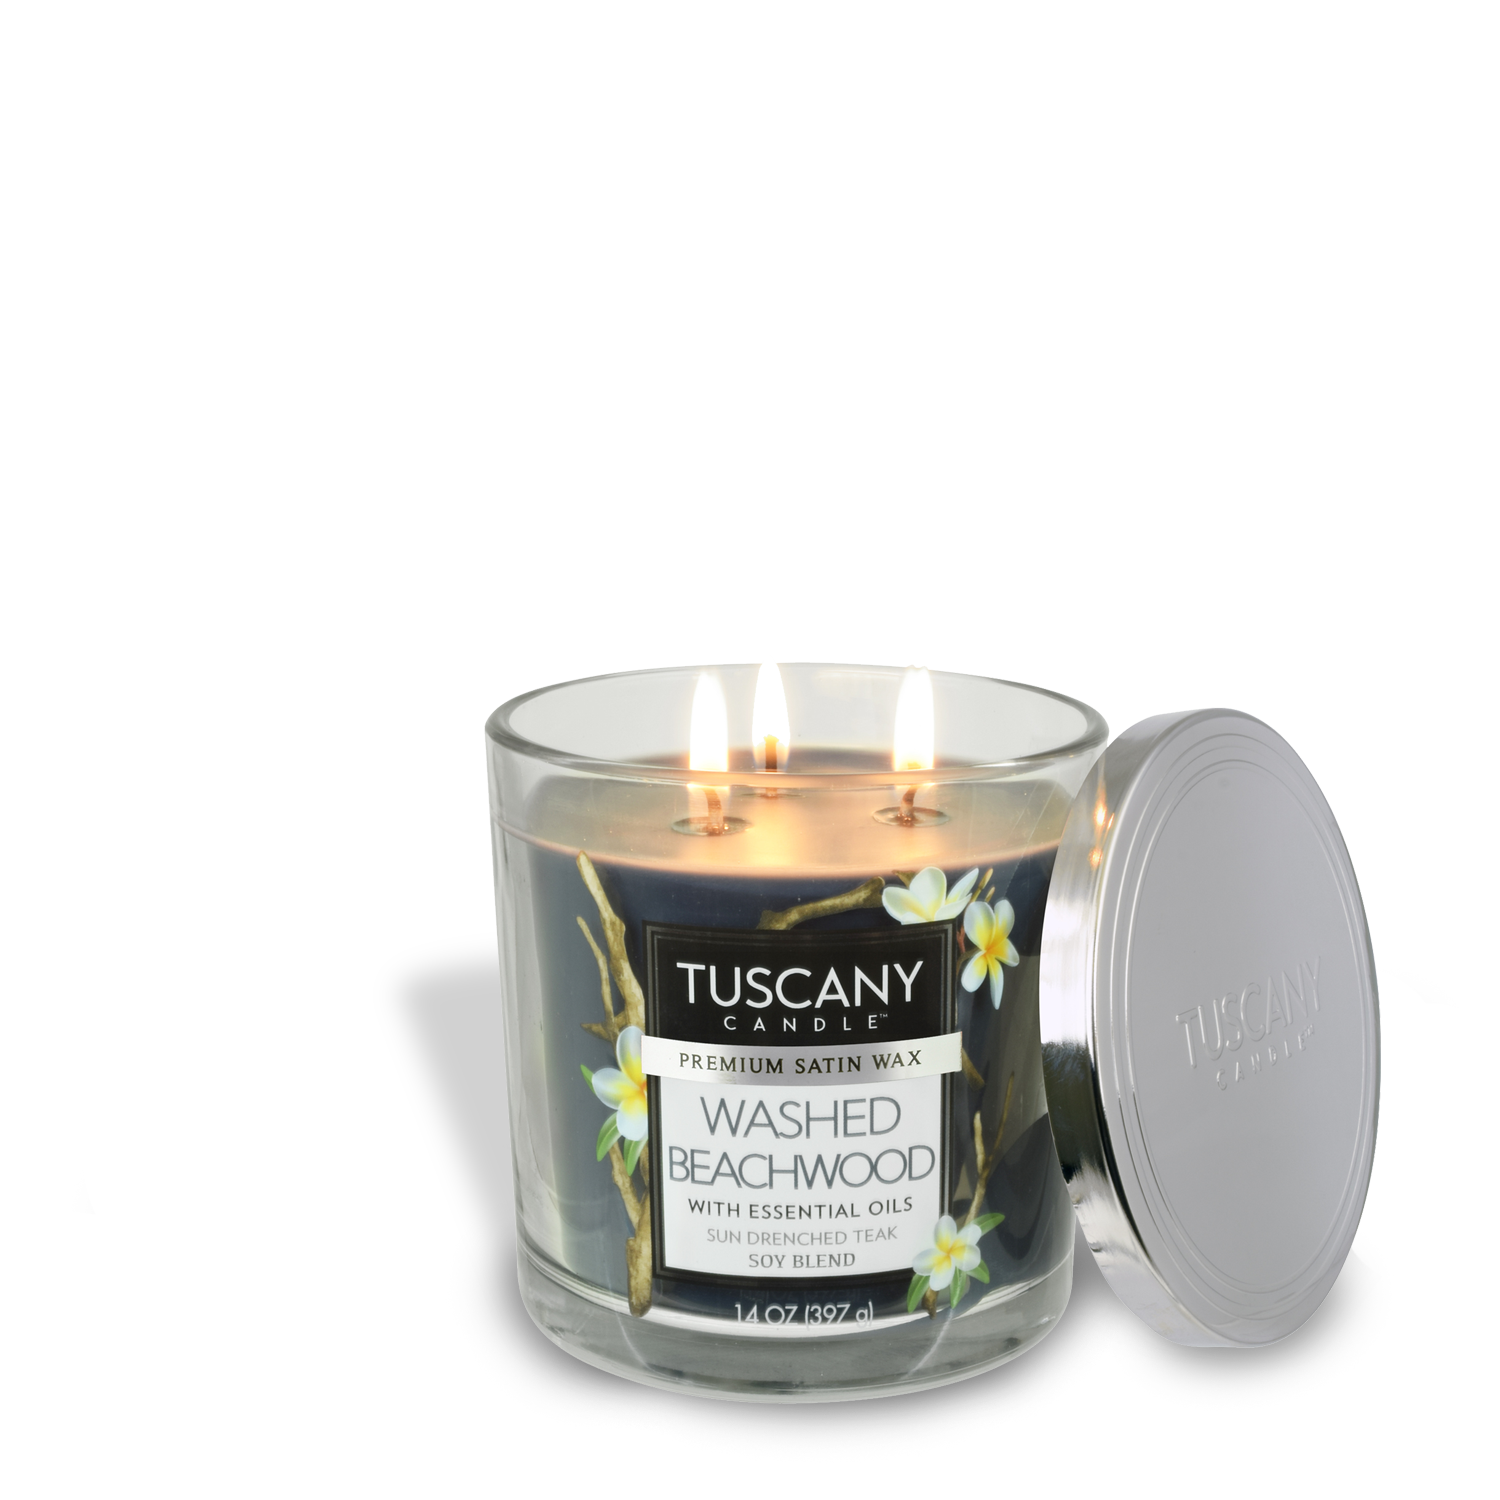 Tuscany Candle Washed Beachwood Long-Lasting Scented Jar Candle (14 oz) with coconut fragrance notes.